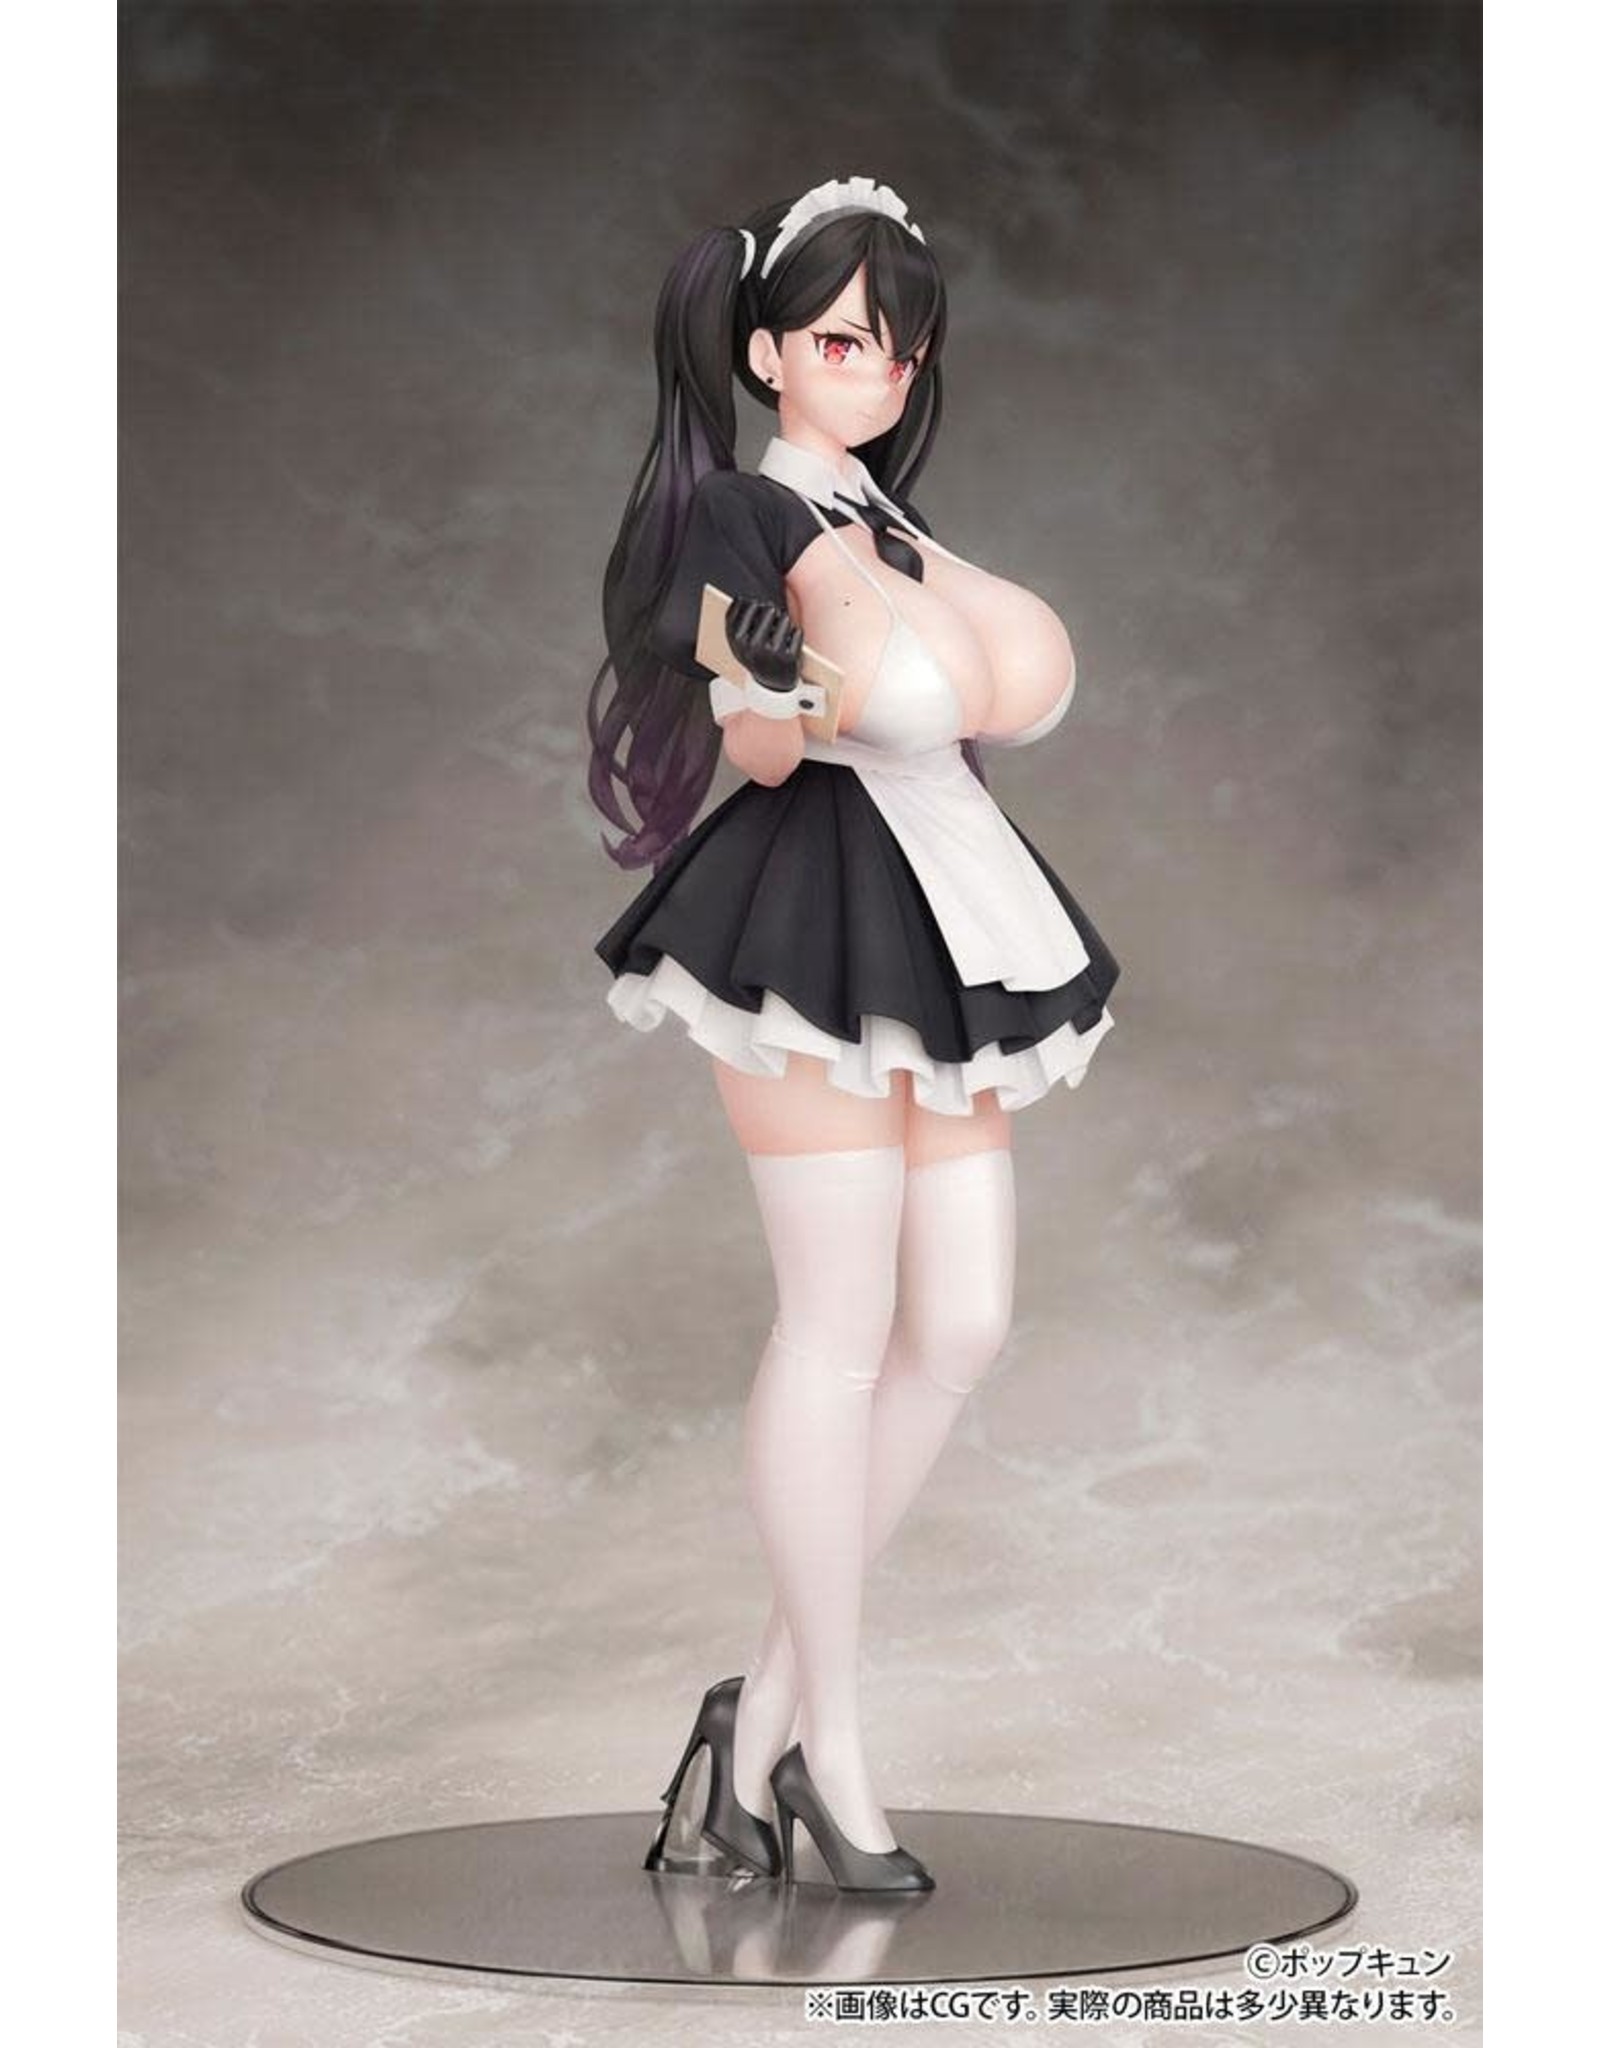 Maid Cafe Waitress Illustrated by Popqn - Original Character Statue 1/6 - B'full by Fots Japan - 27 cm